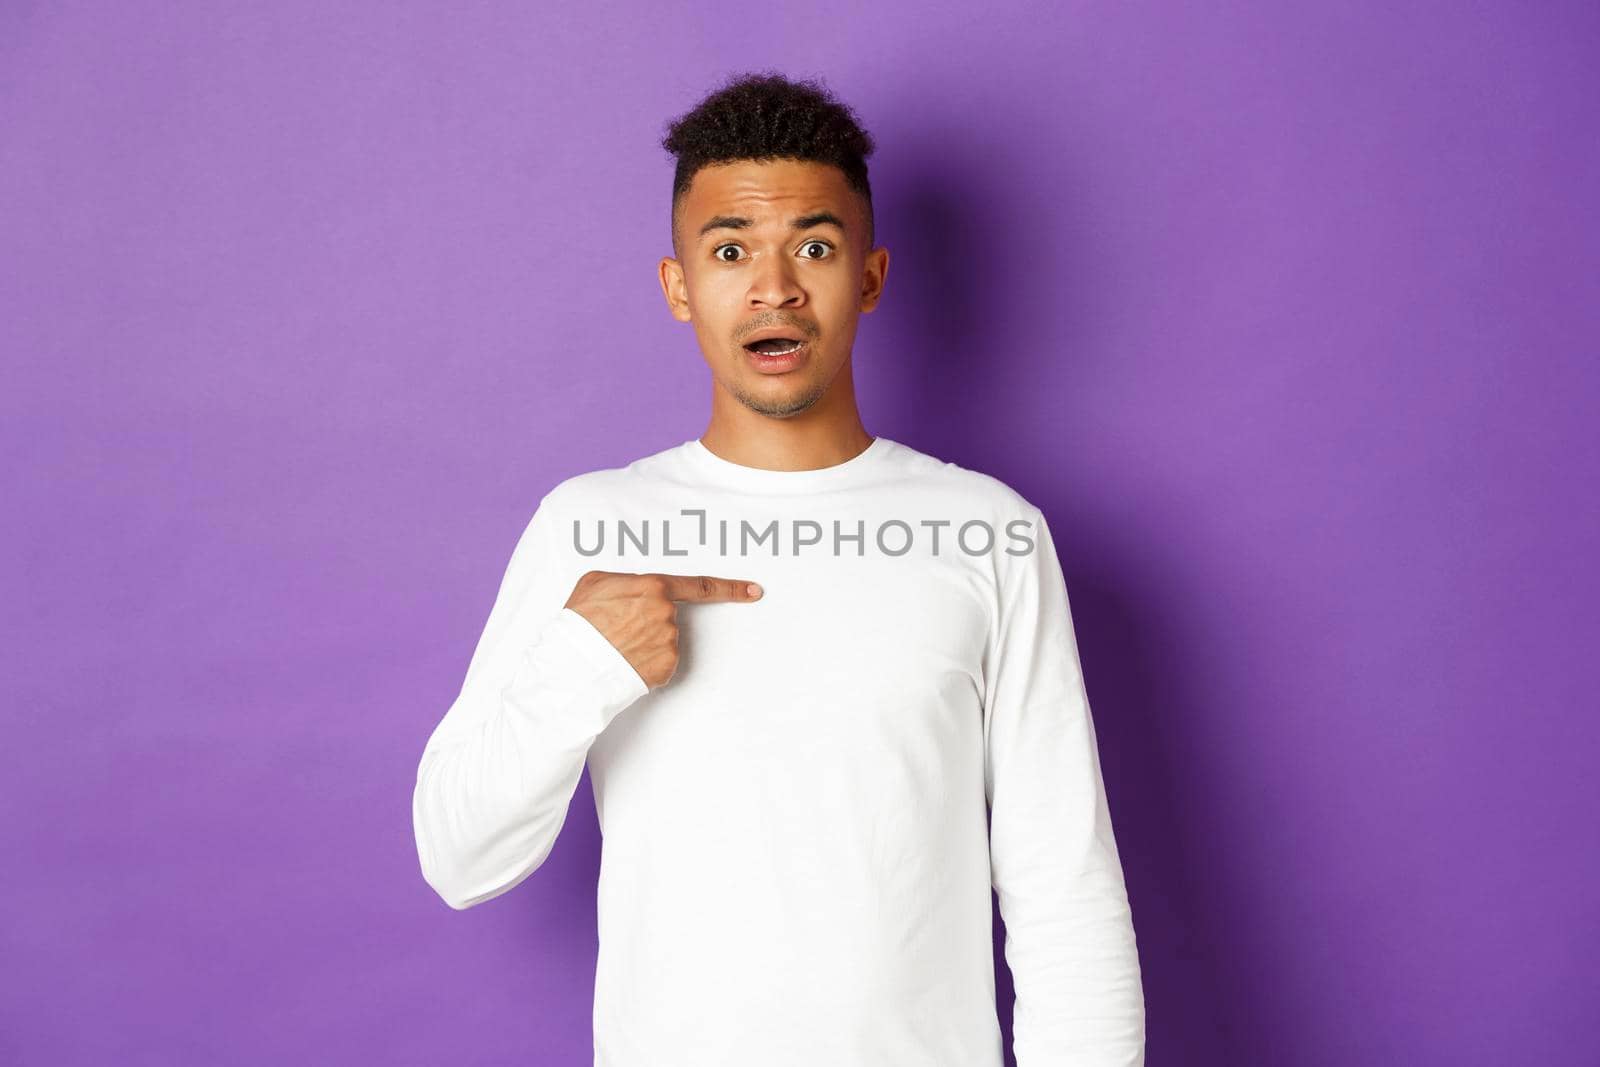 Portrait of confused and nervous african-american young man, pointing at himself, being chosen, standing over purple background.